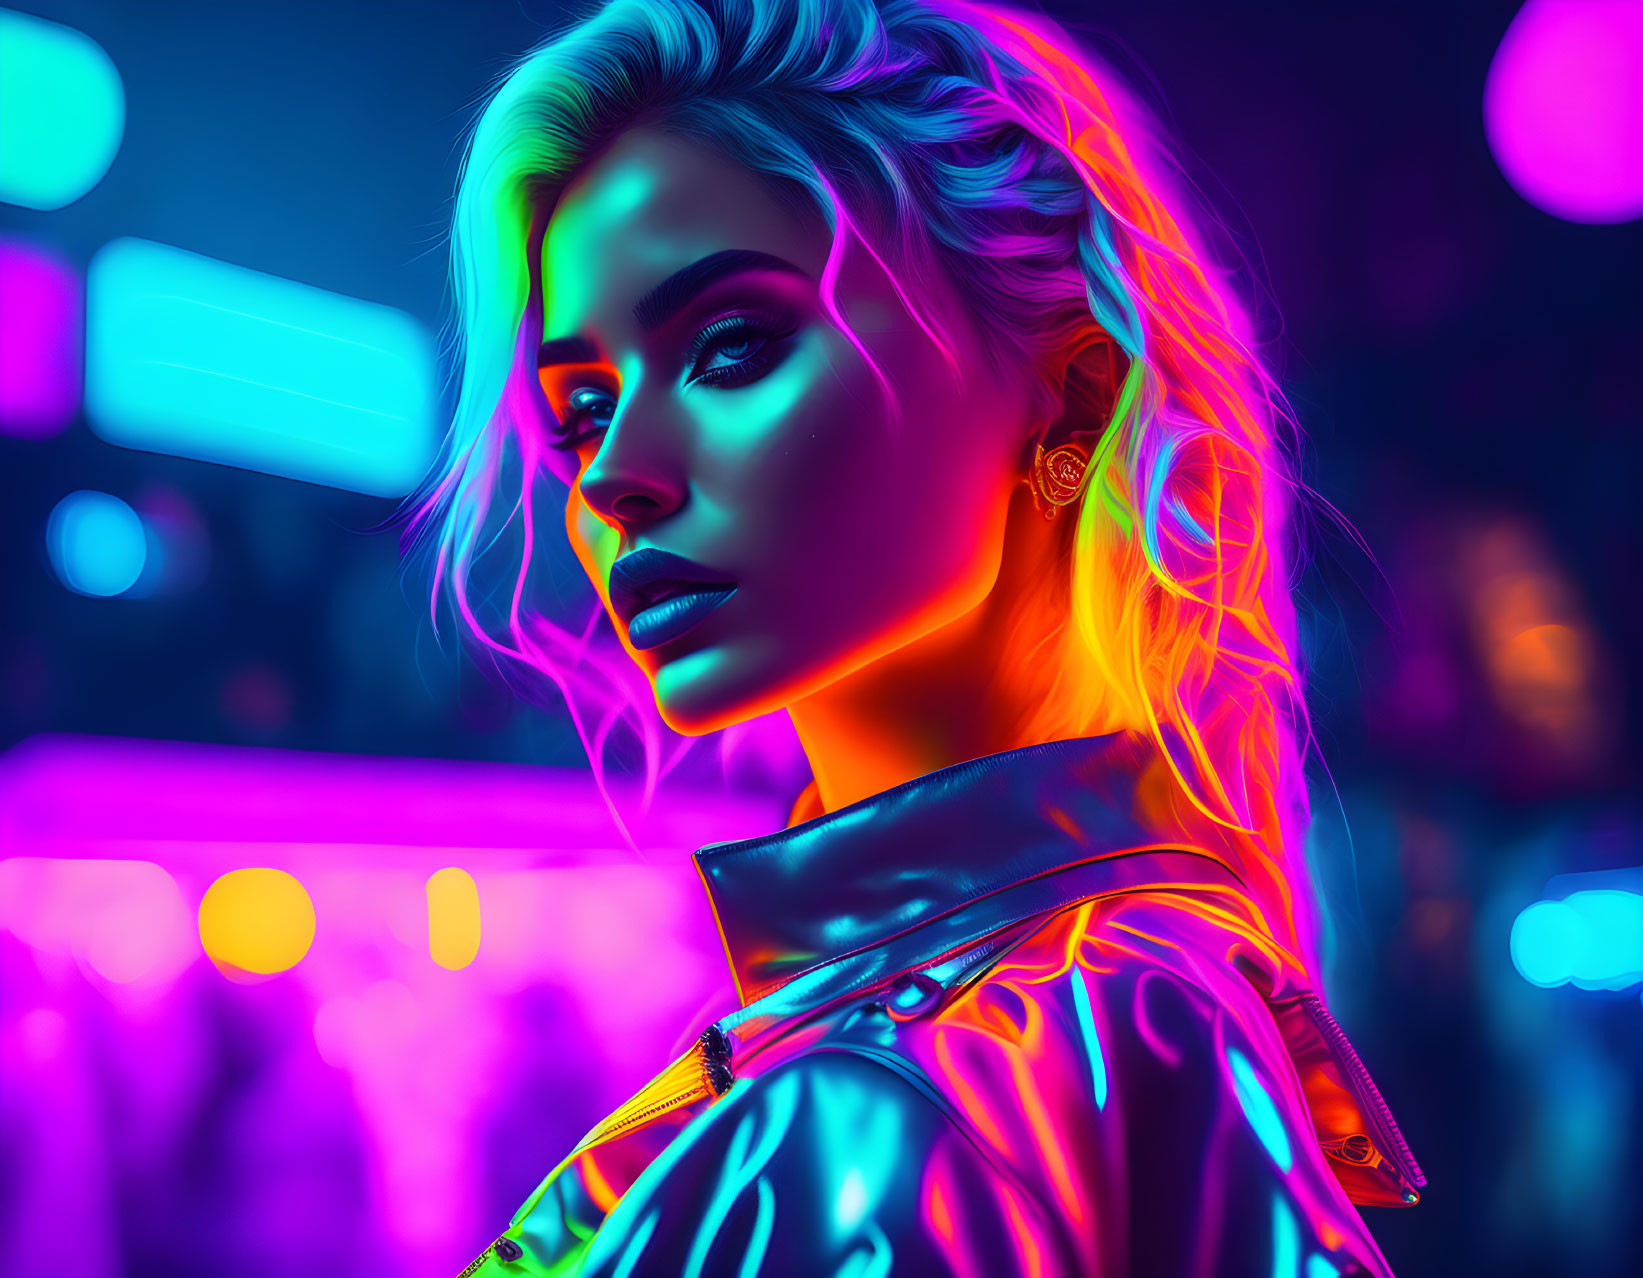 Woman with Neon Aesthetic in Night Setting: Blue and Pink Lights Reflecting on Blonde Hair